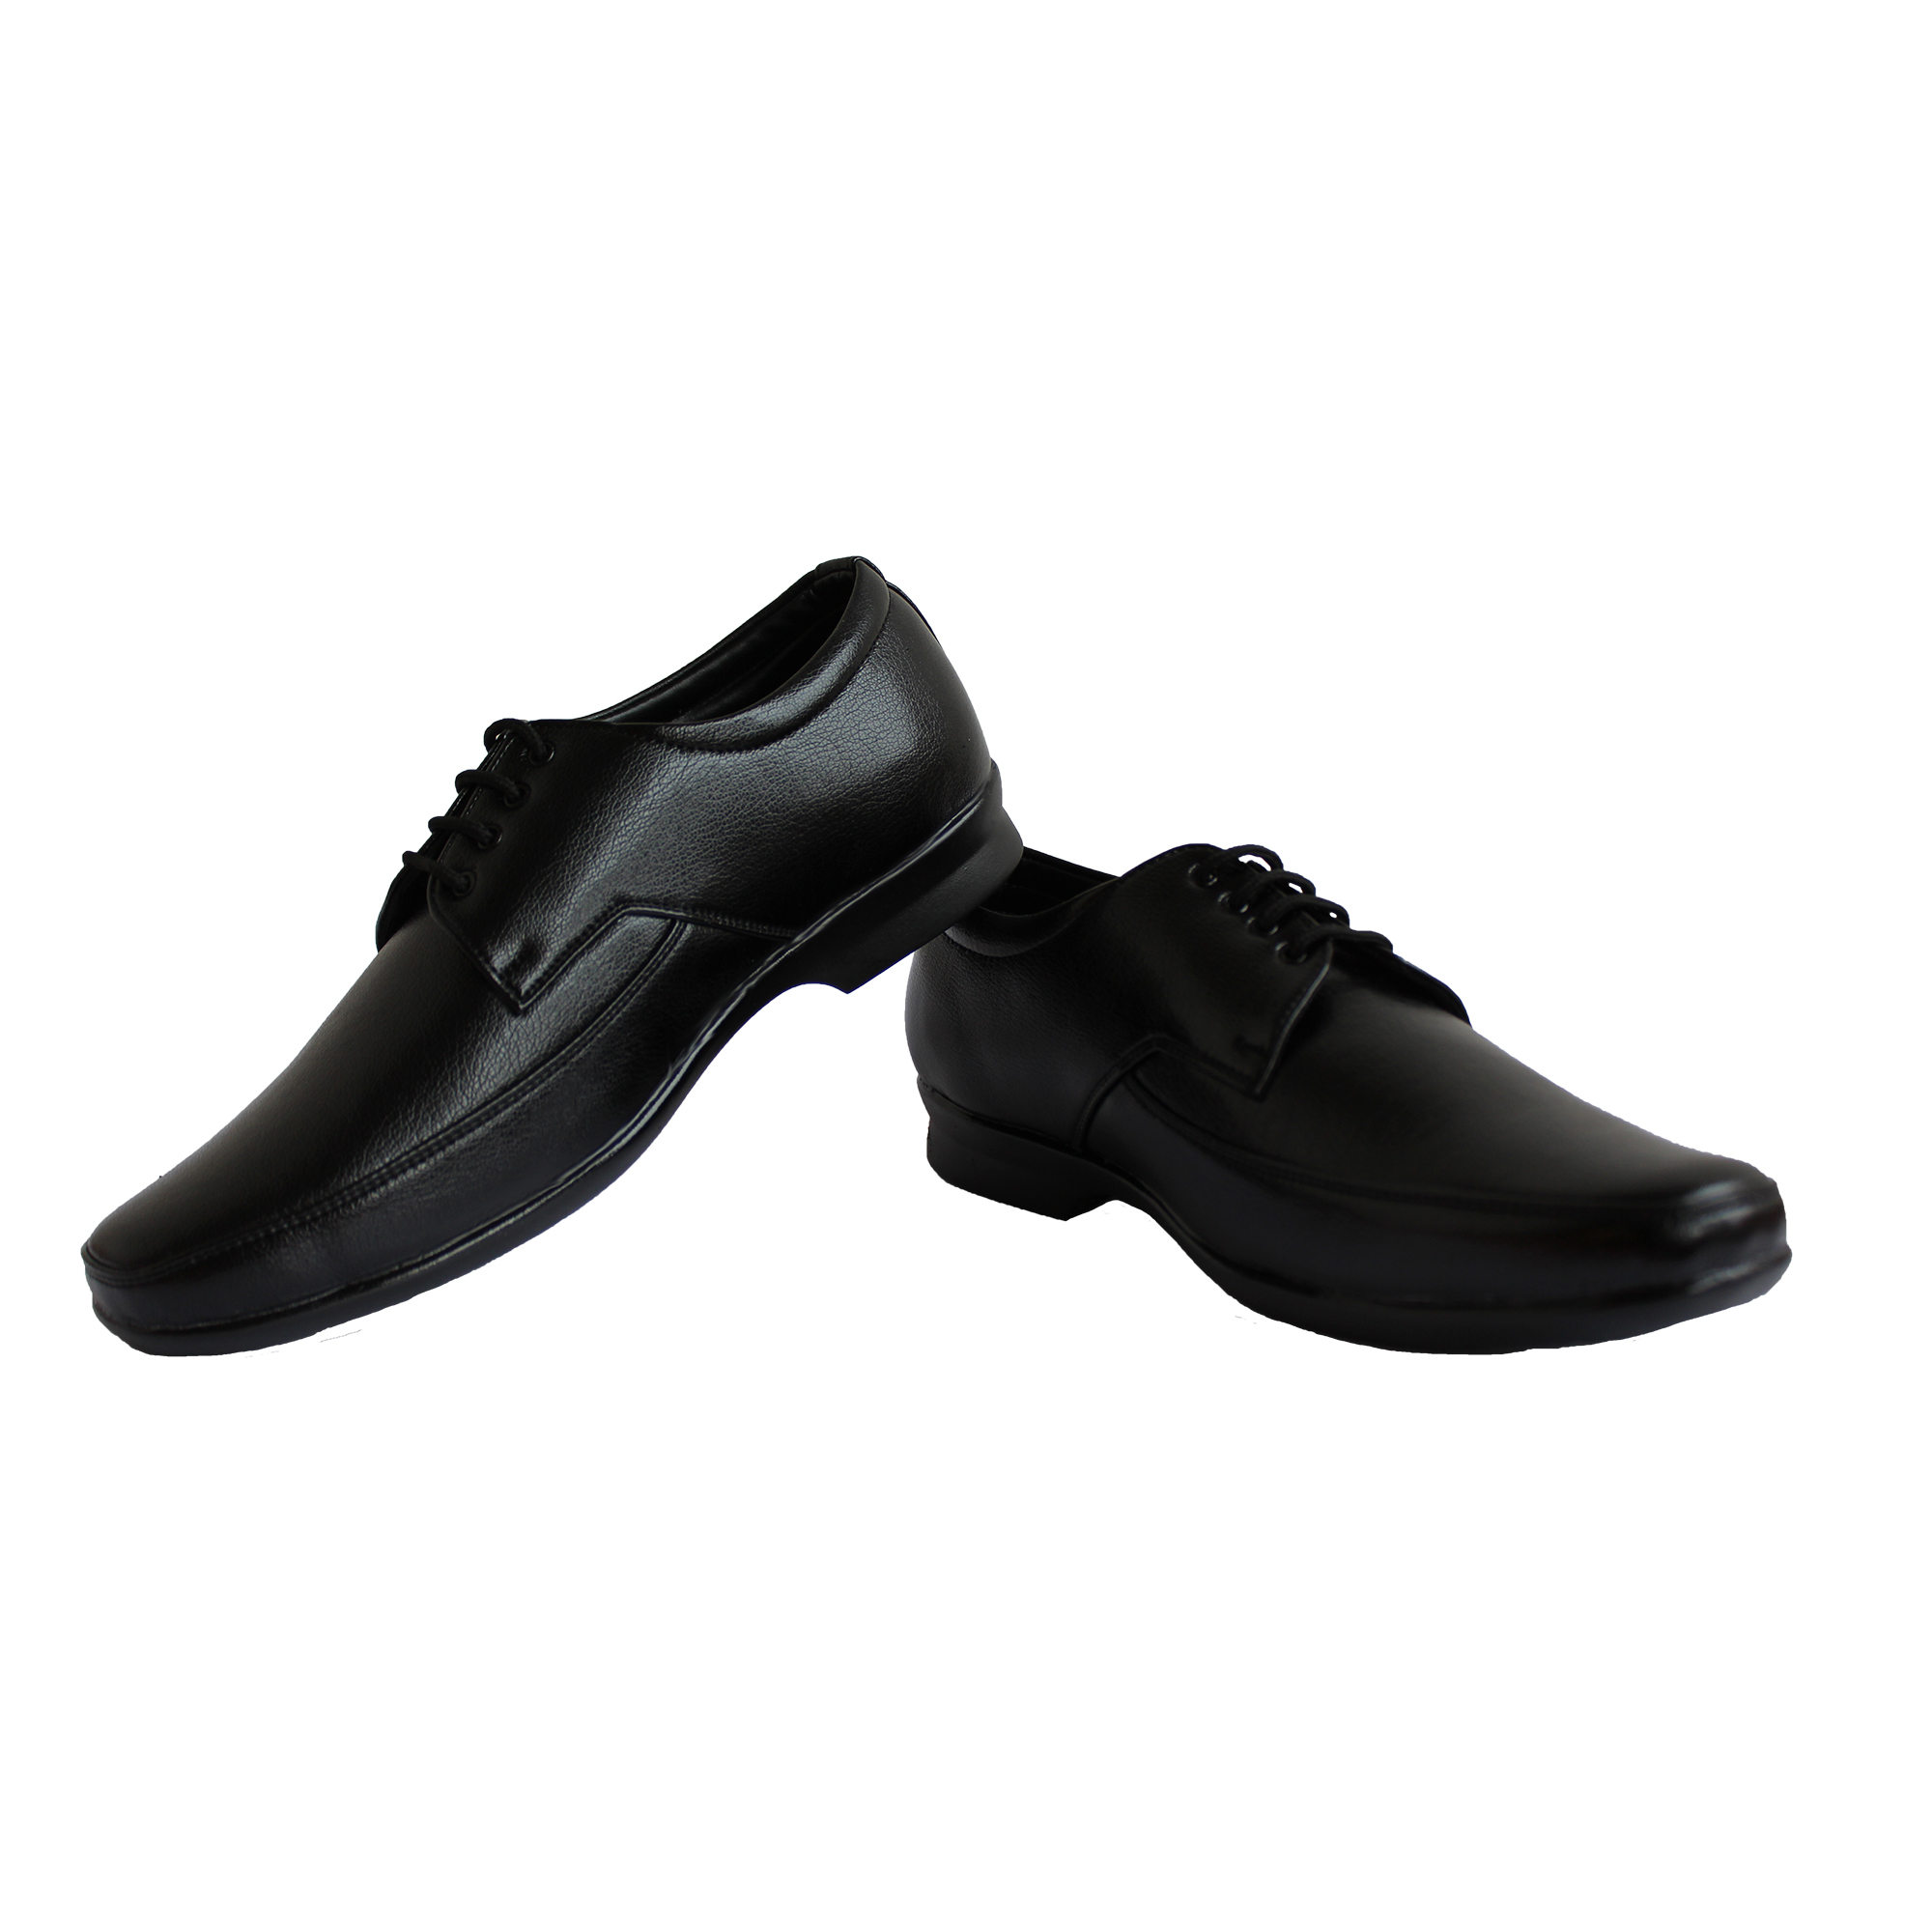 HIKBI Synthetic Leather Formal Shoes Formal Daily Use Derby Lace Up Office shoes